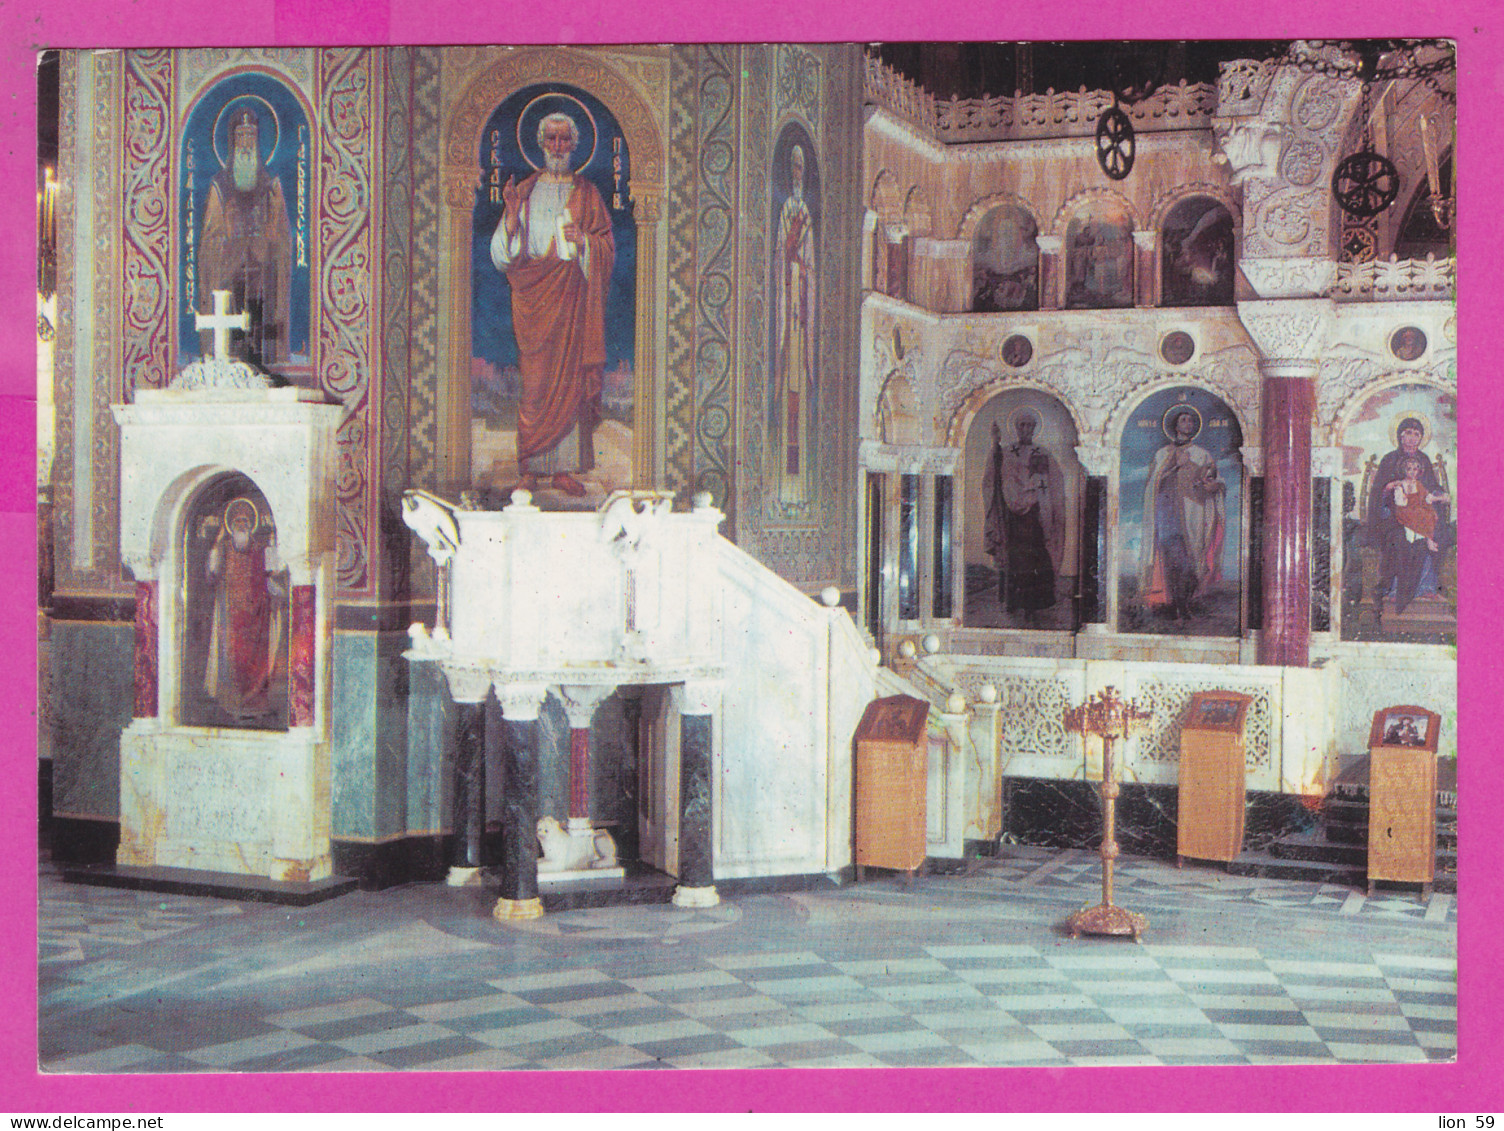 311273 / Bulgaria - Sofia - The Pulpit And Part Of Central Altar - Patriarchal Cathedral Of St. Alexander Nevsky 1979 PC - Churches & Cathedrals